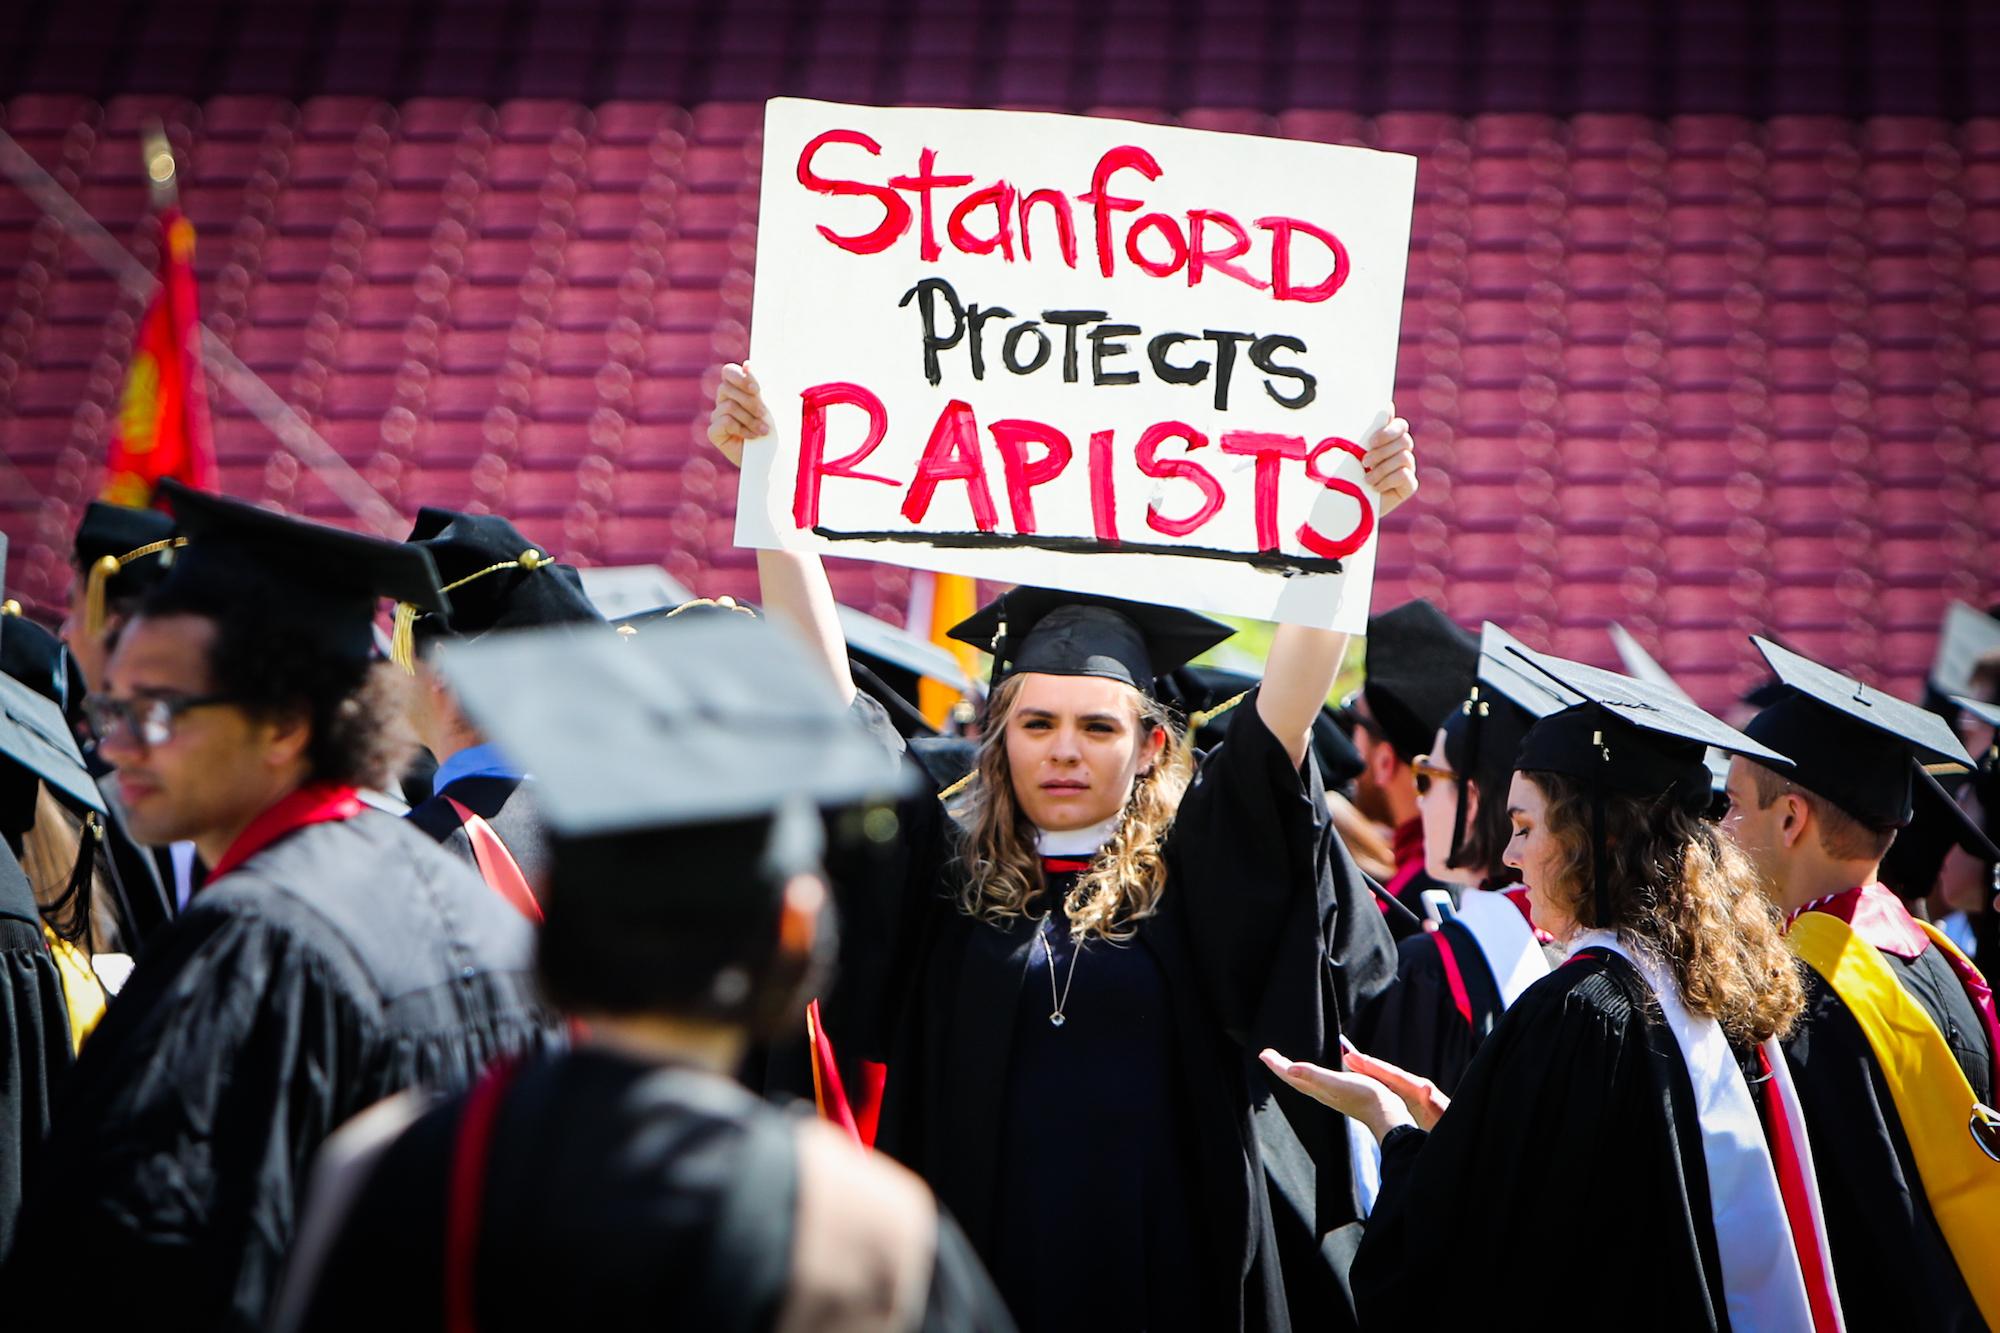 A woman carries a sign in solidarity for a Stanford rape victim during graduation at Stanford University, in Palo Alto, California, on June 12, 2016. Stanford students are protesting the university's handling of rape cases alleging that the campus keeps secret the names of students found to be responsible for sexual assault and misconduct.